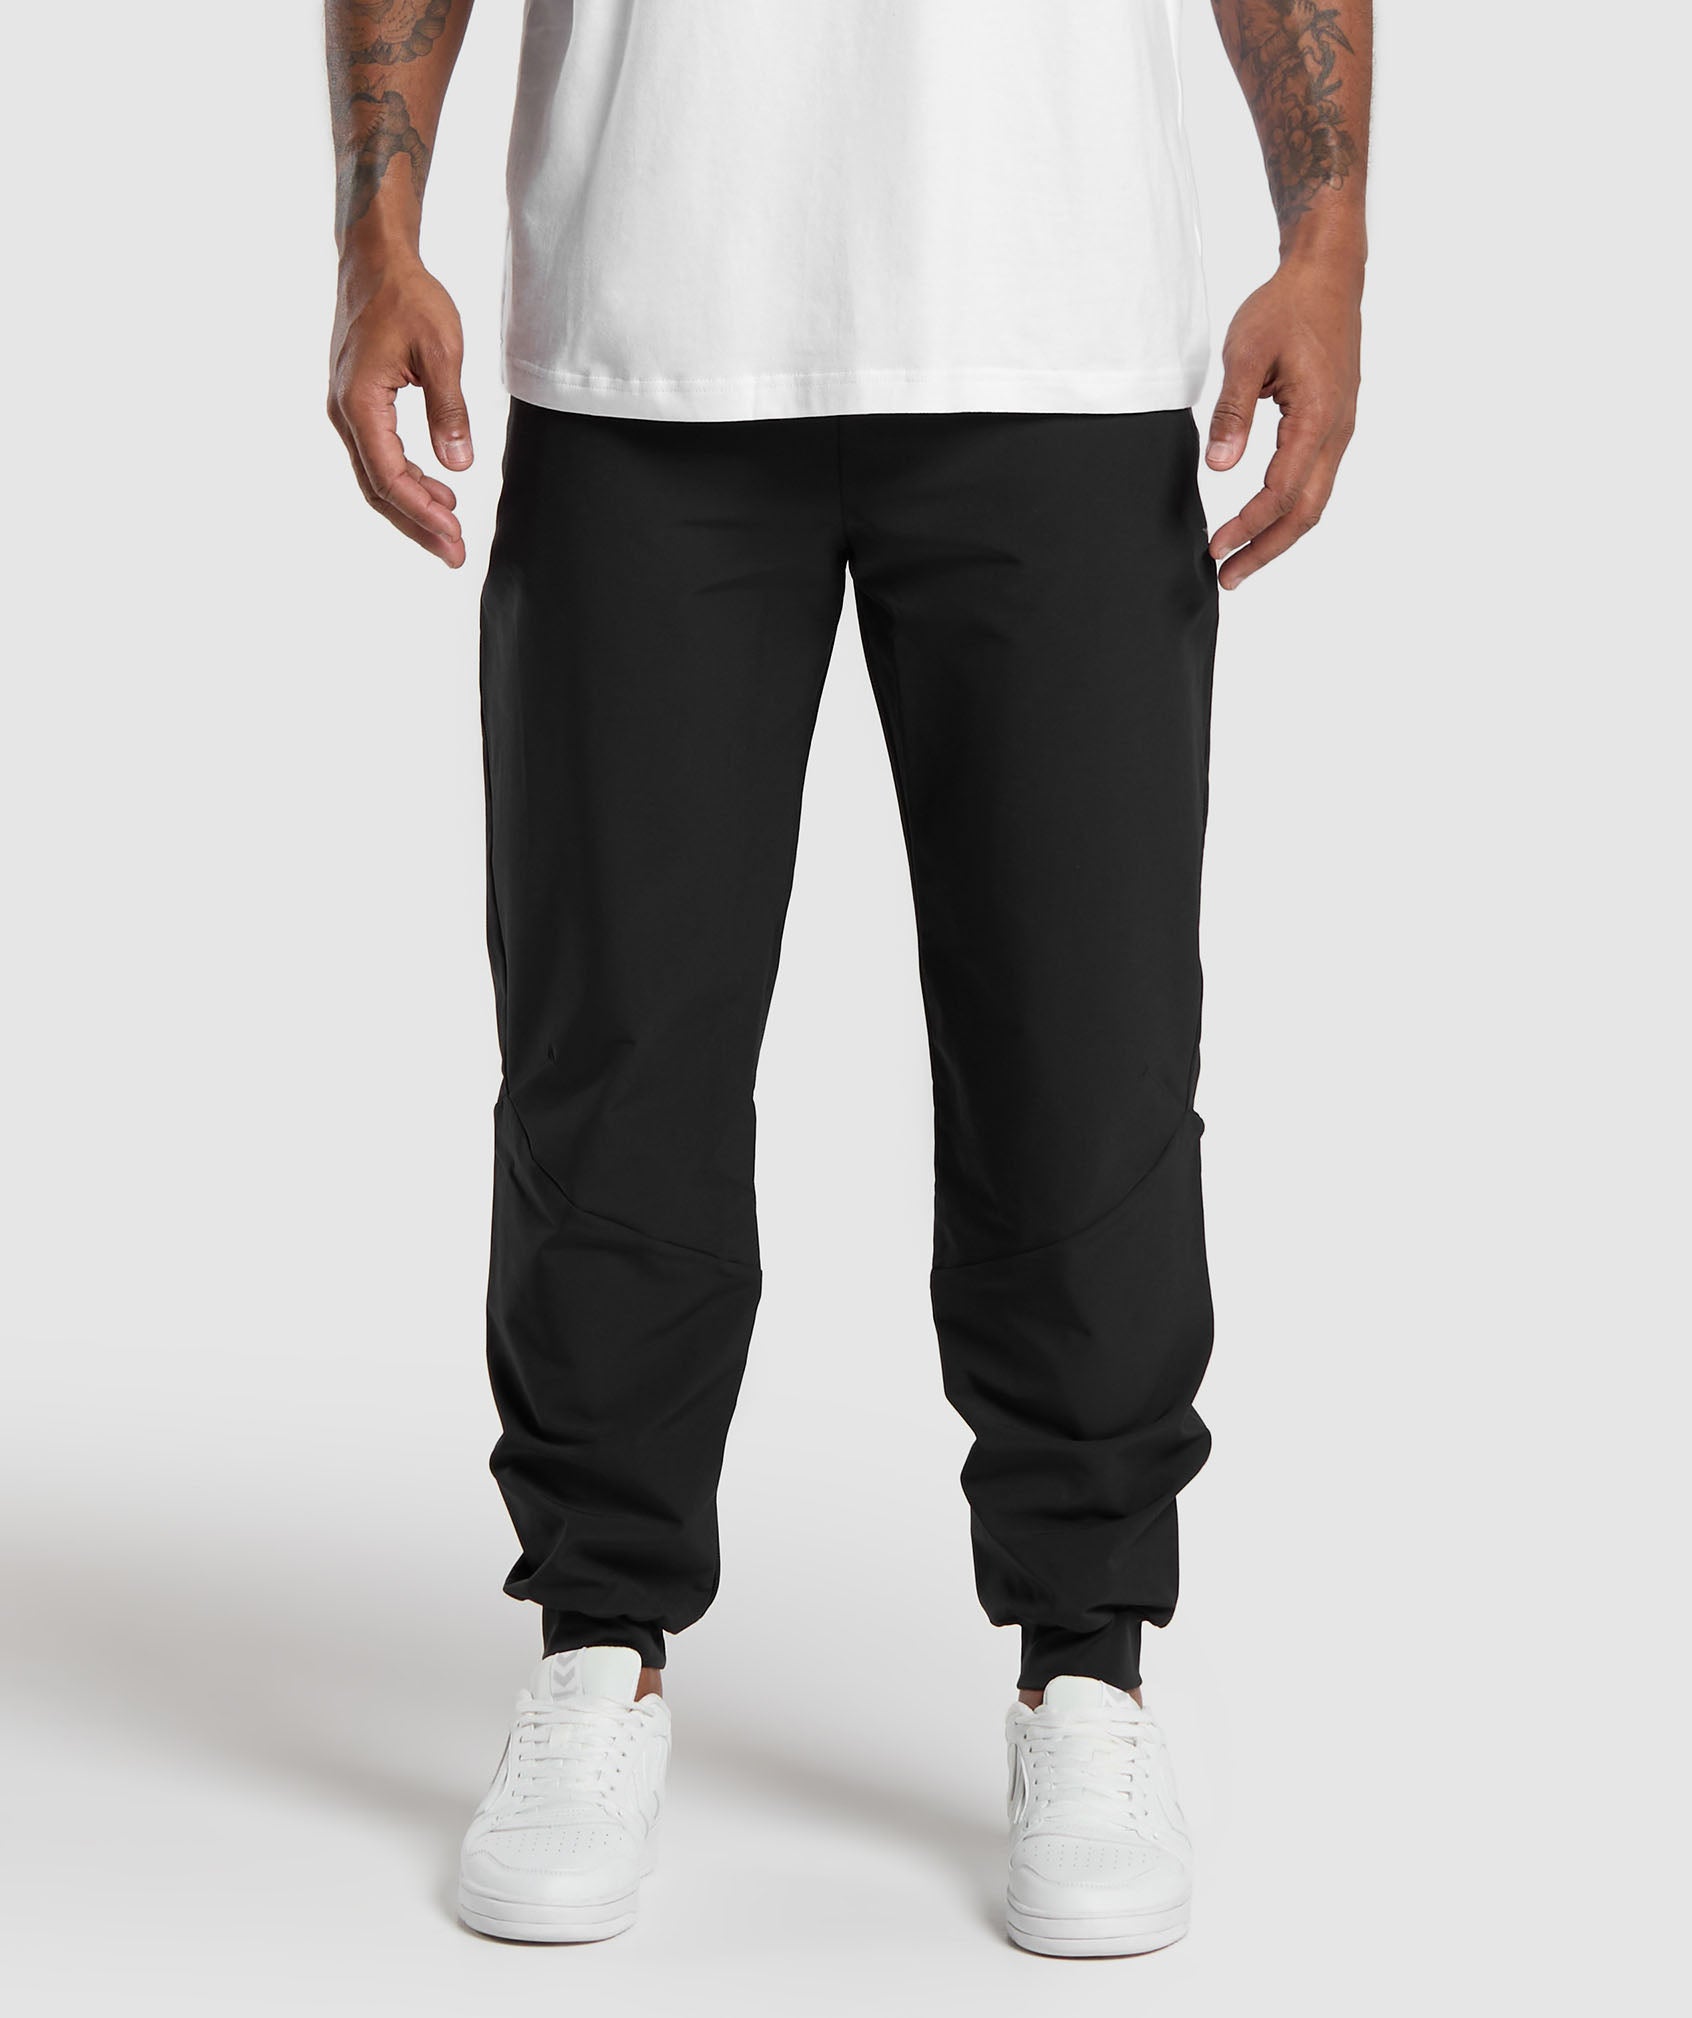 Ease Woven Joggers in Black - view 1